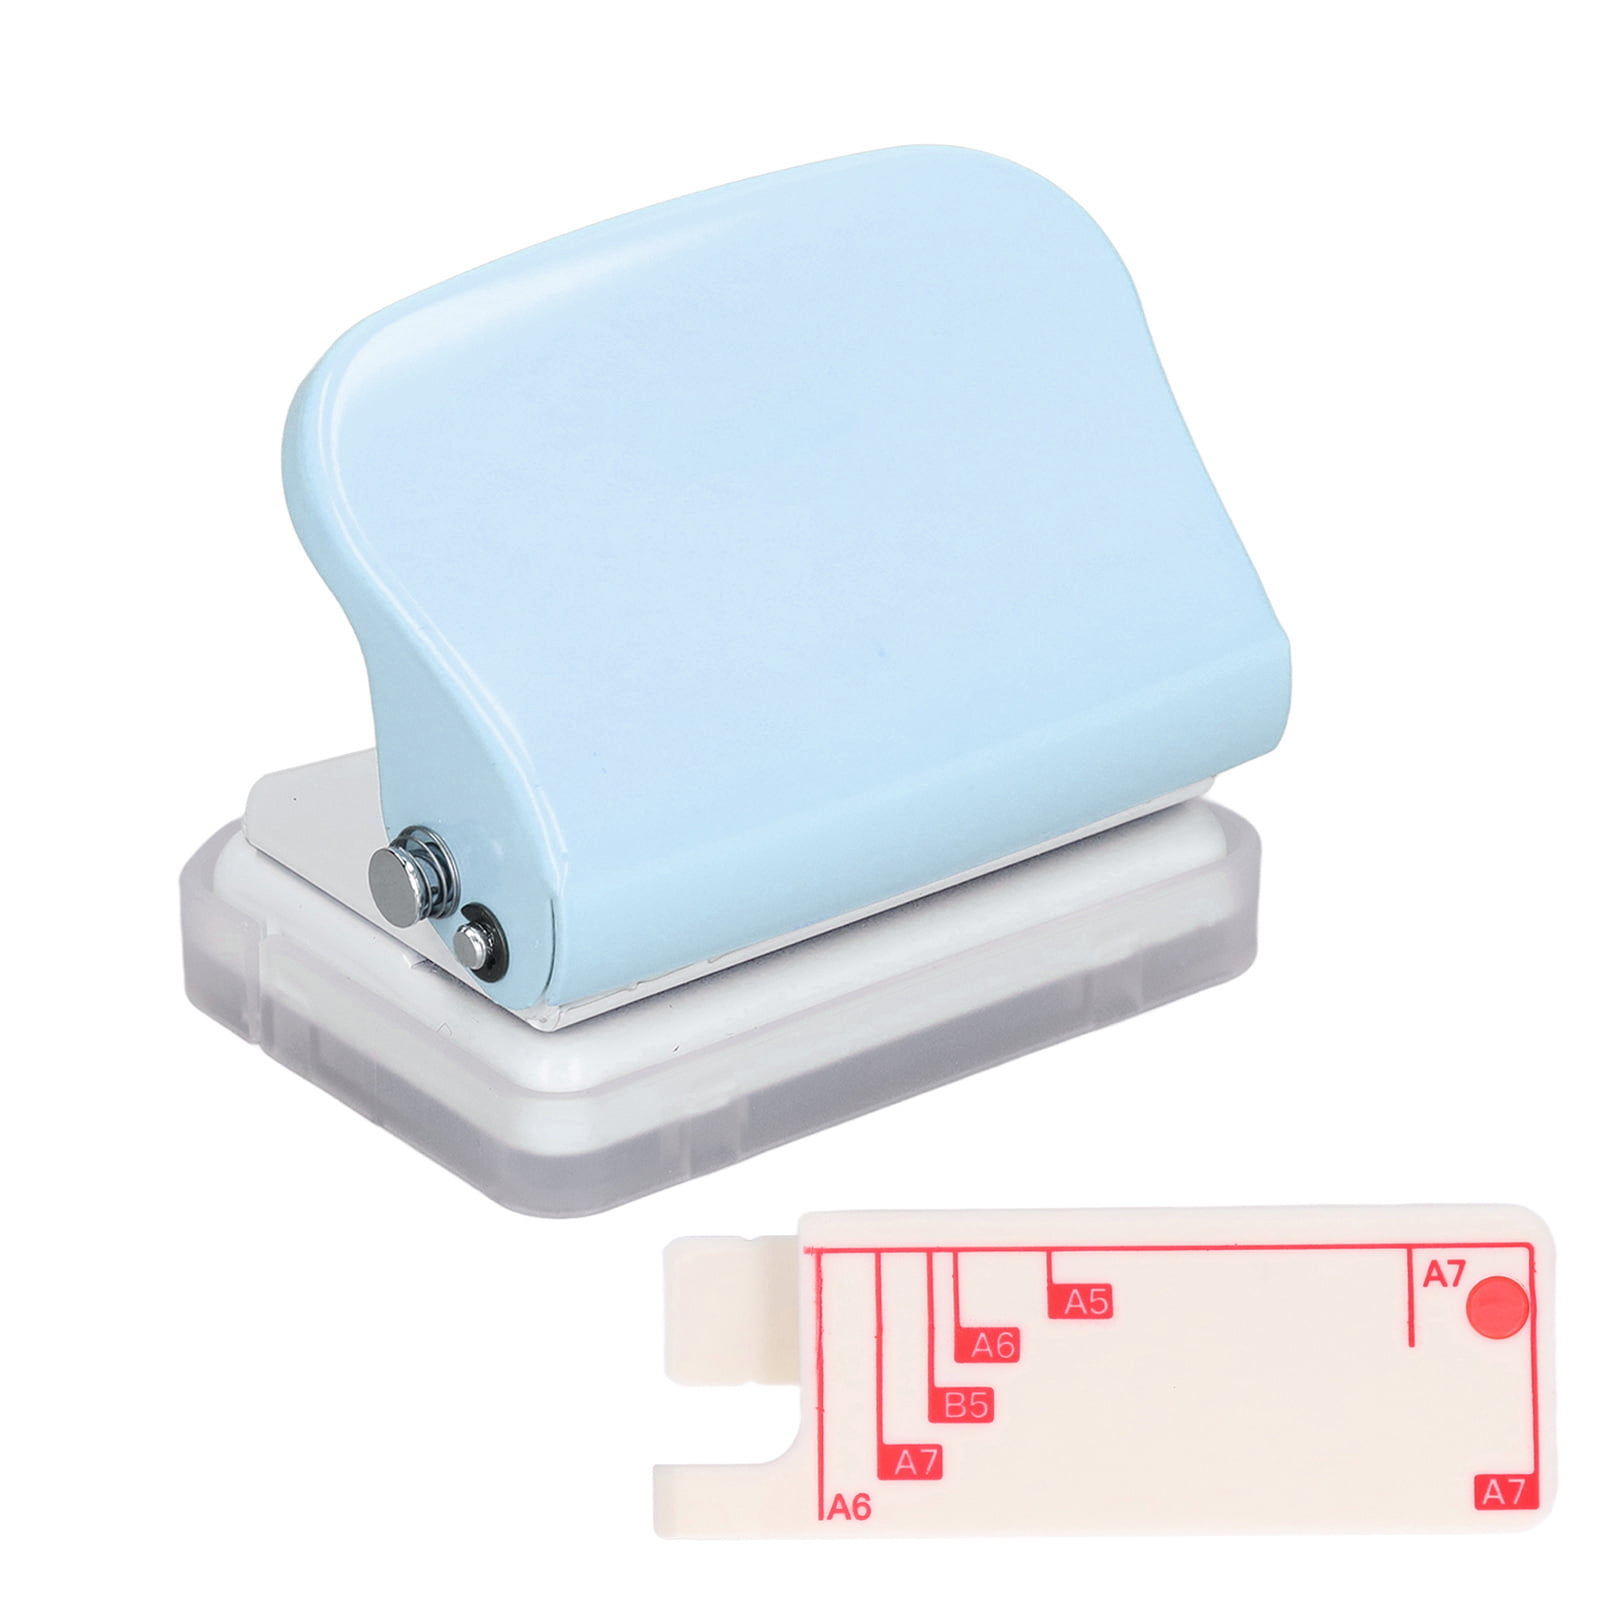 Hole Punch, Handheld Hole Puncher Ruler Design For School For Office ...